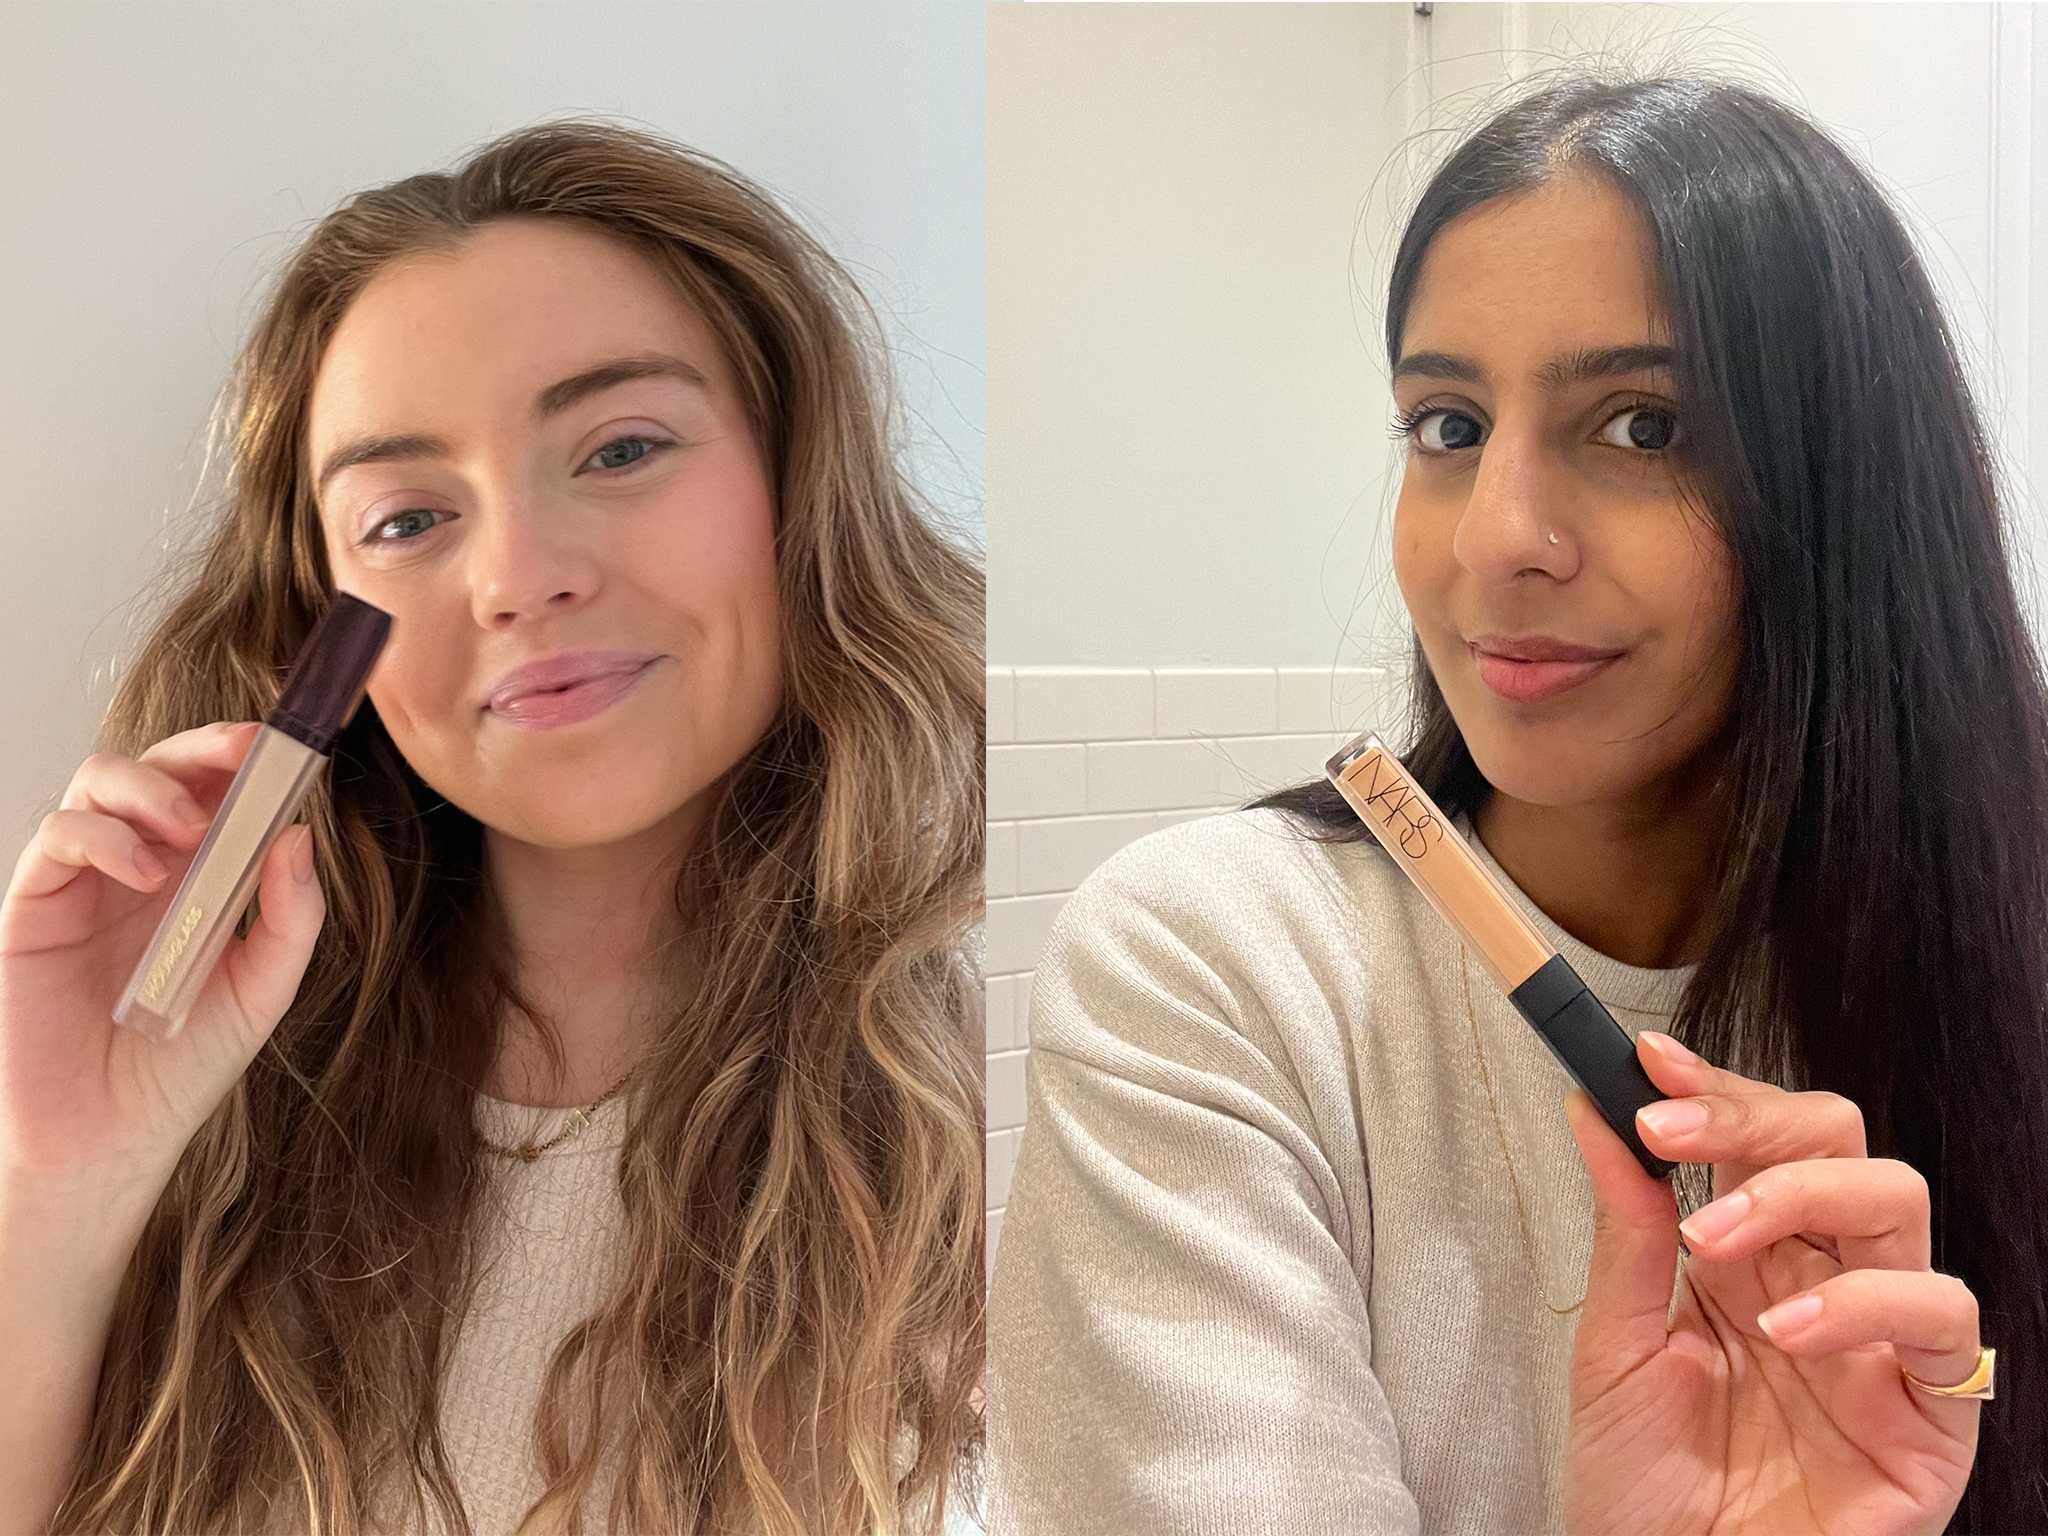 Our duo of testers tried a wide range of concealers